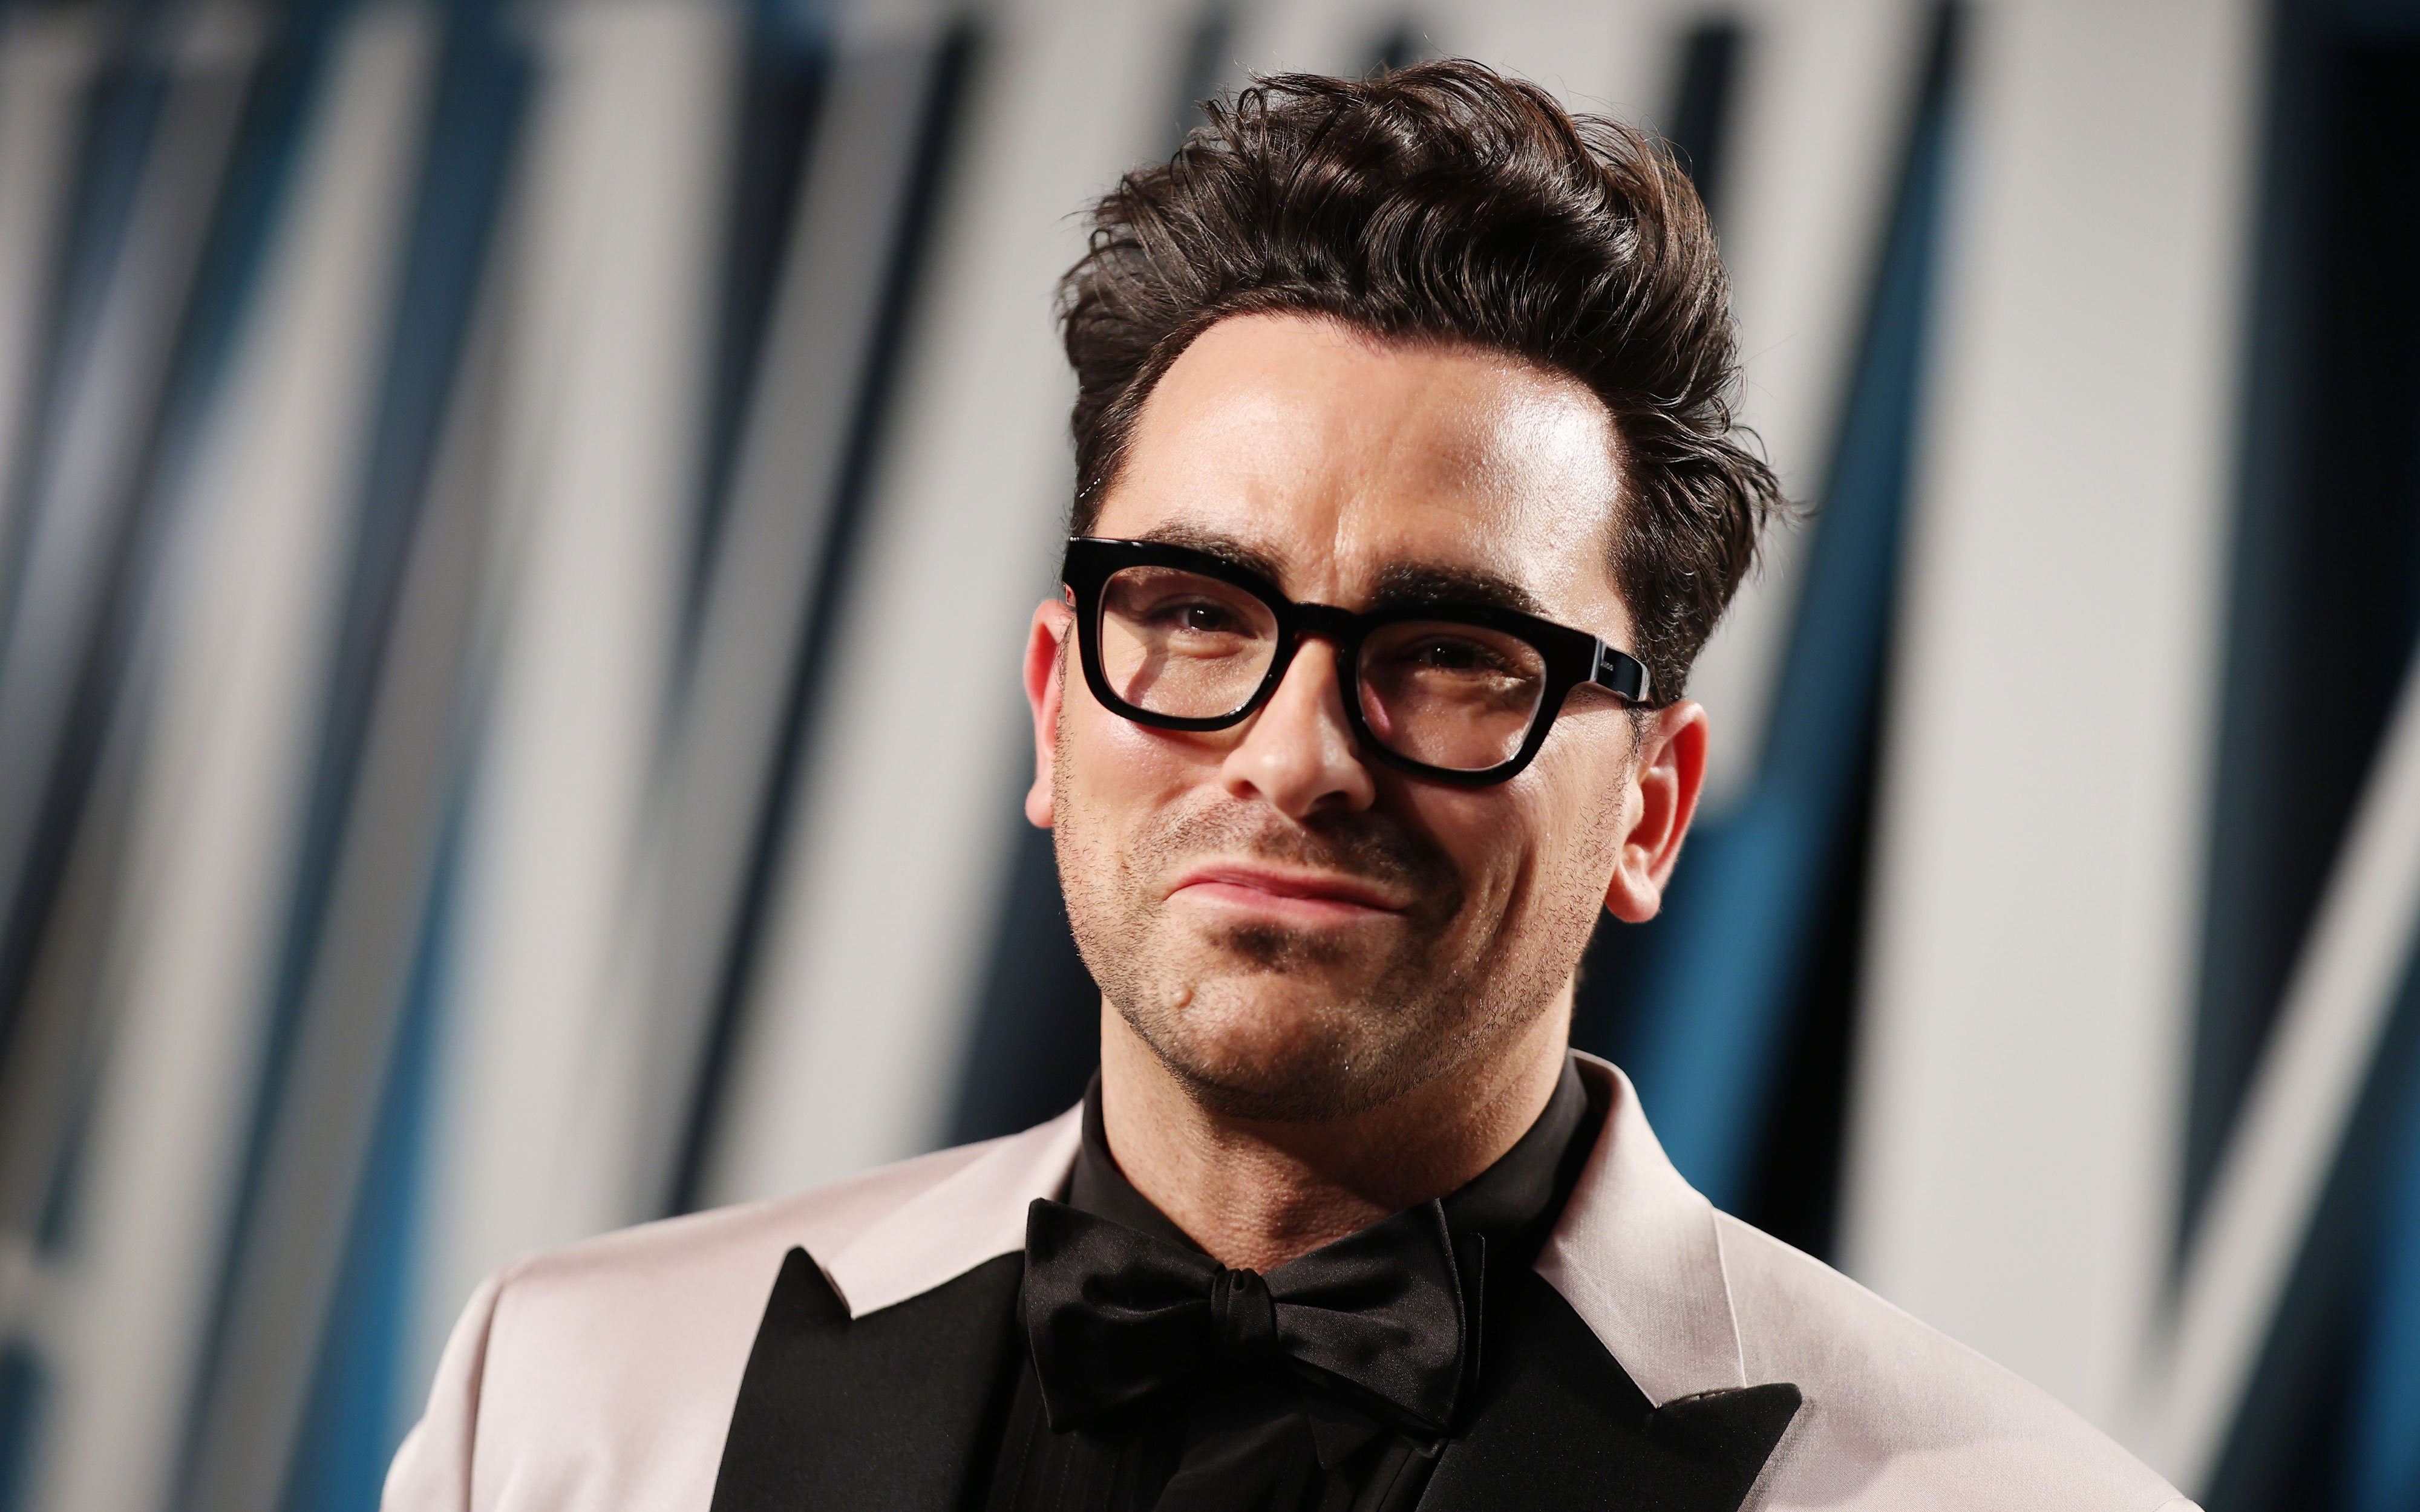 Dan Levy Opens Paris Fashion Week With a Monologue About the Evolution of Menswear